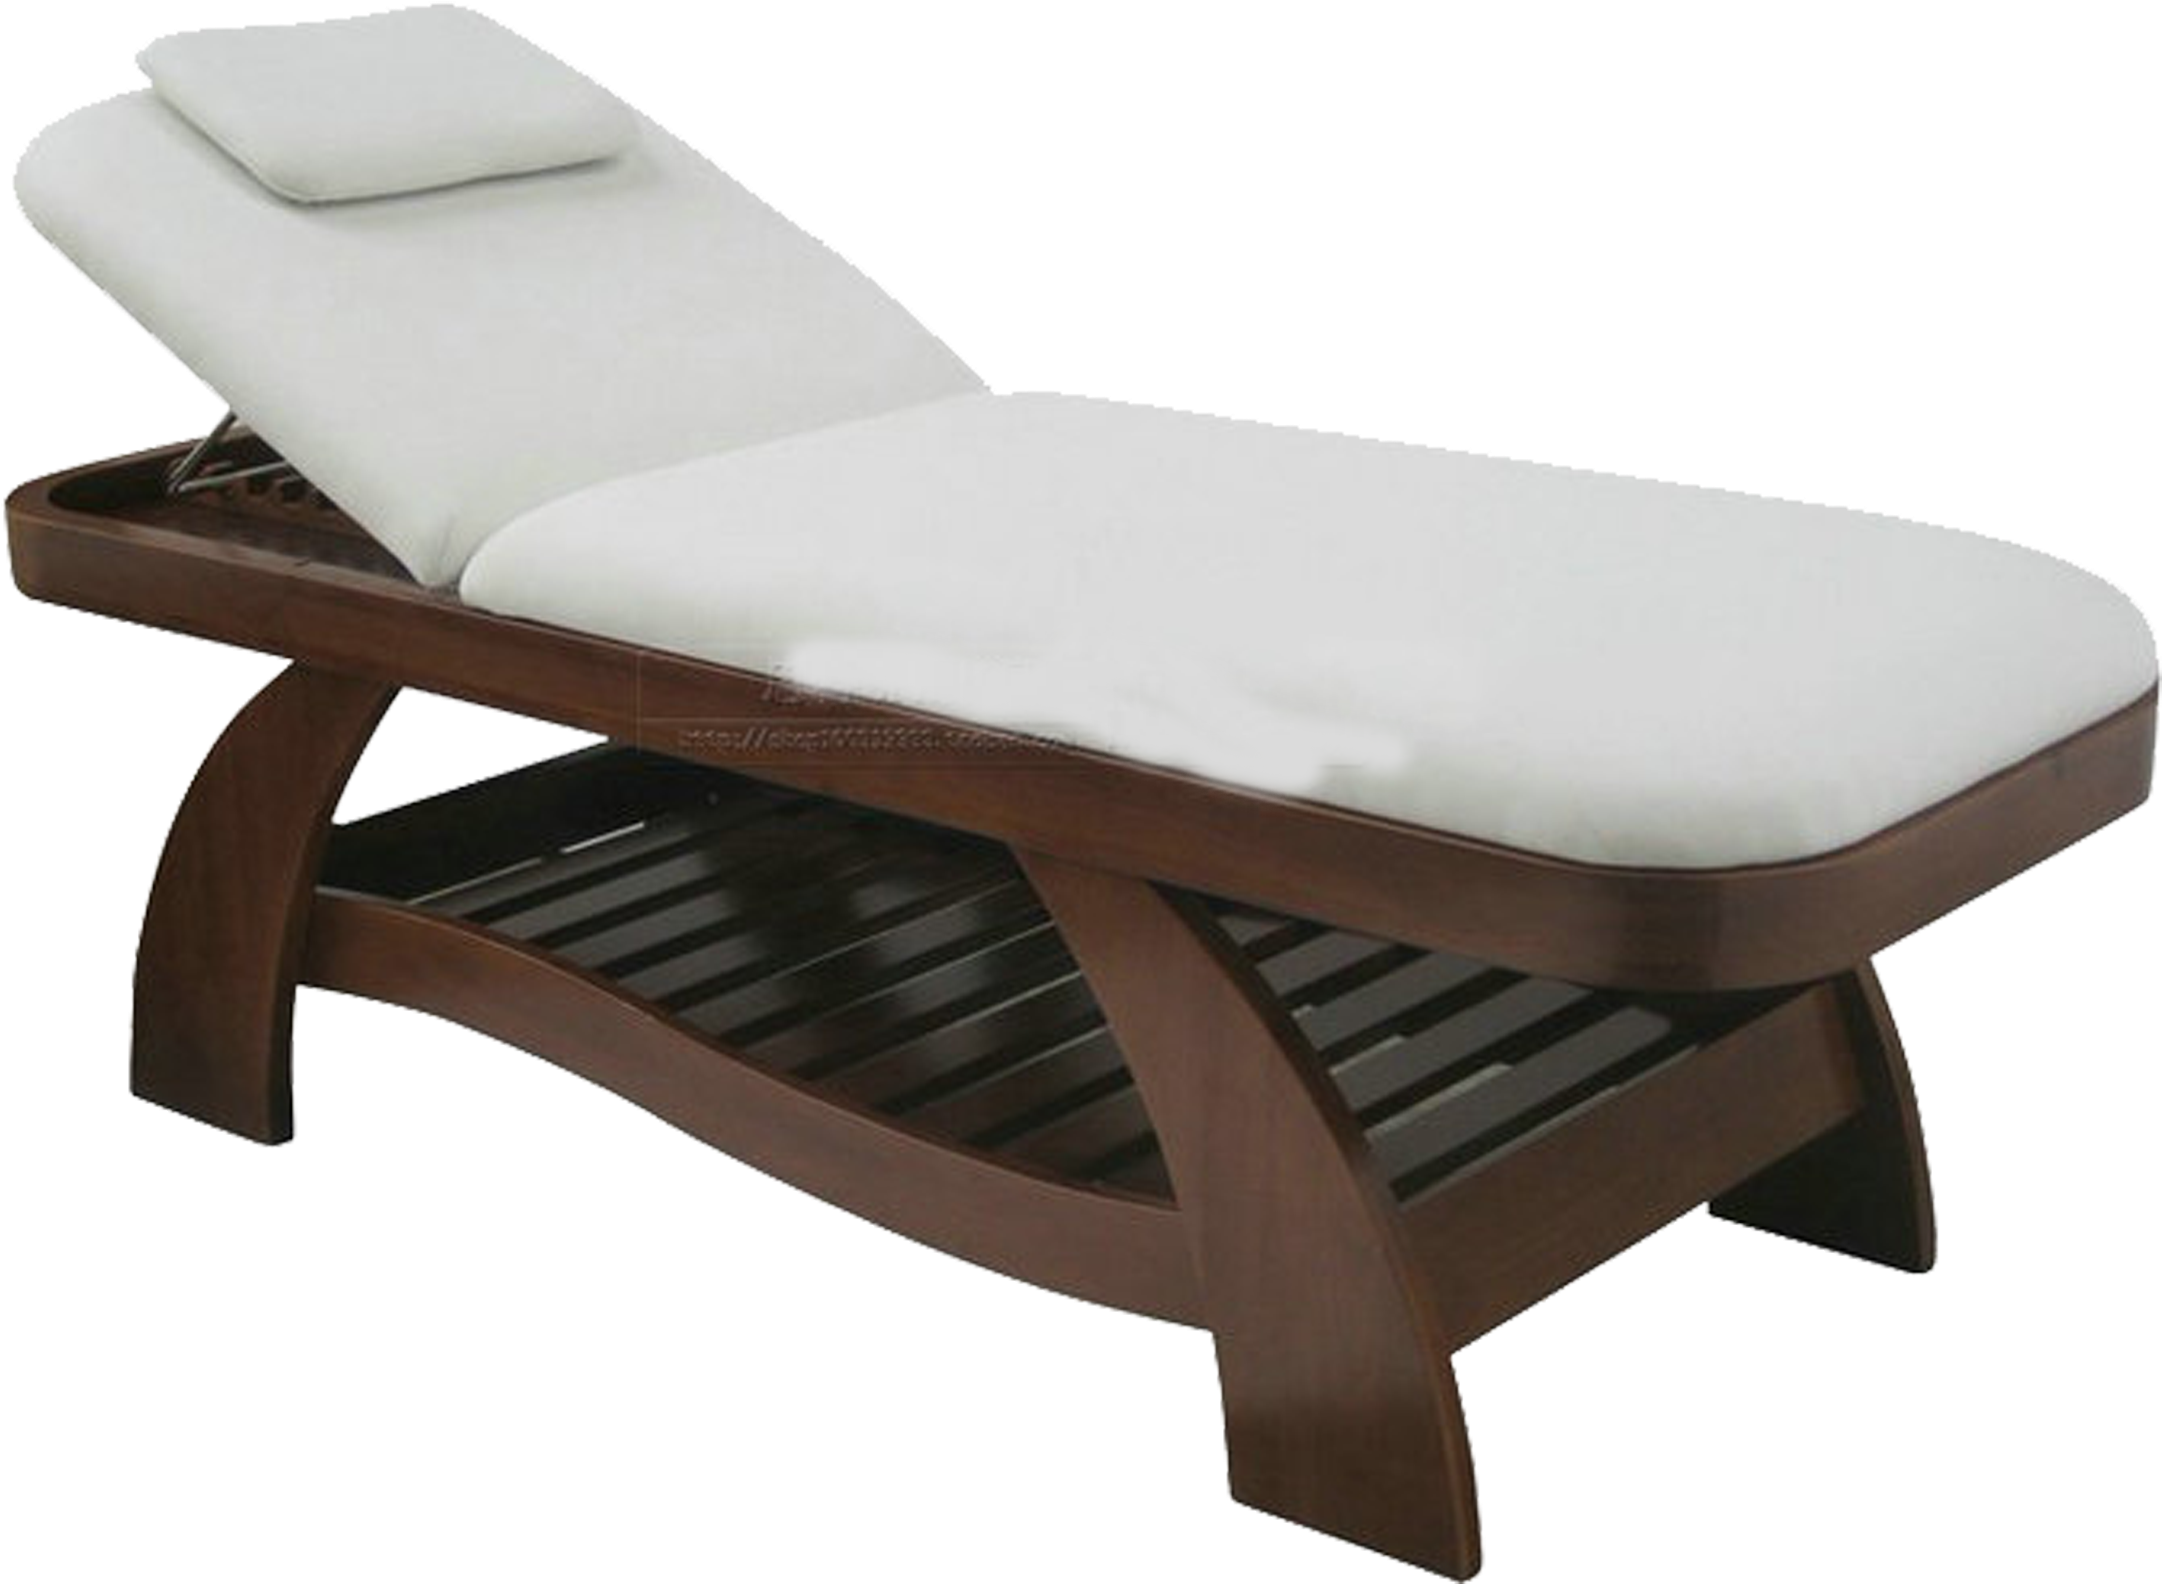 Massage Chair Massage Table Bed - Massage Chair Massage Table Bed (2362x2362)